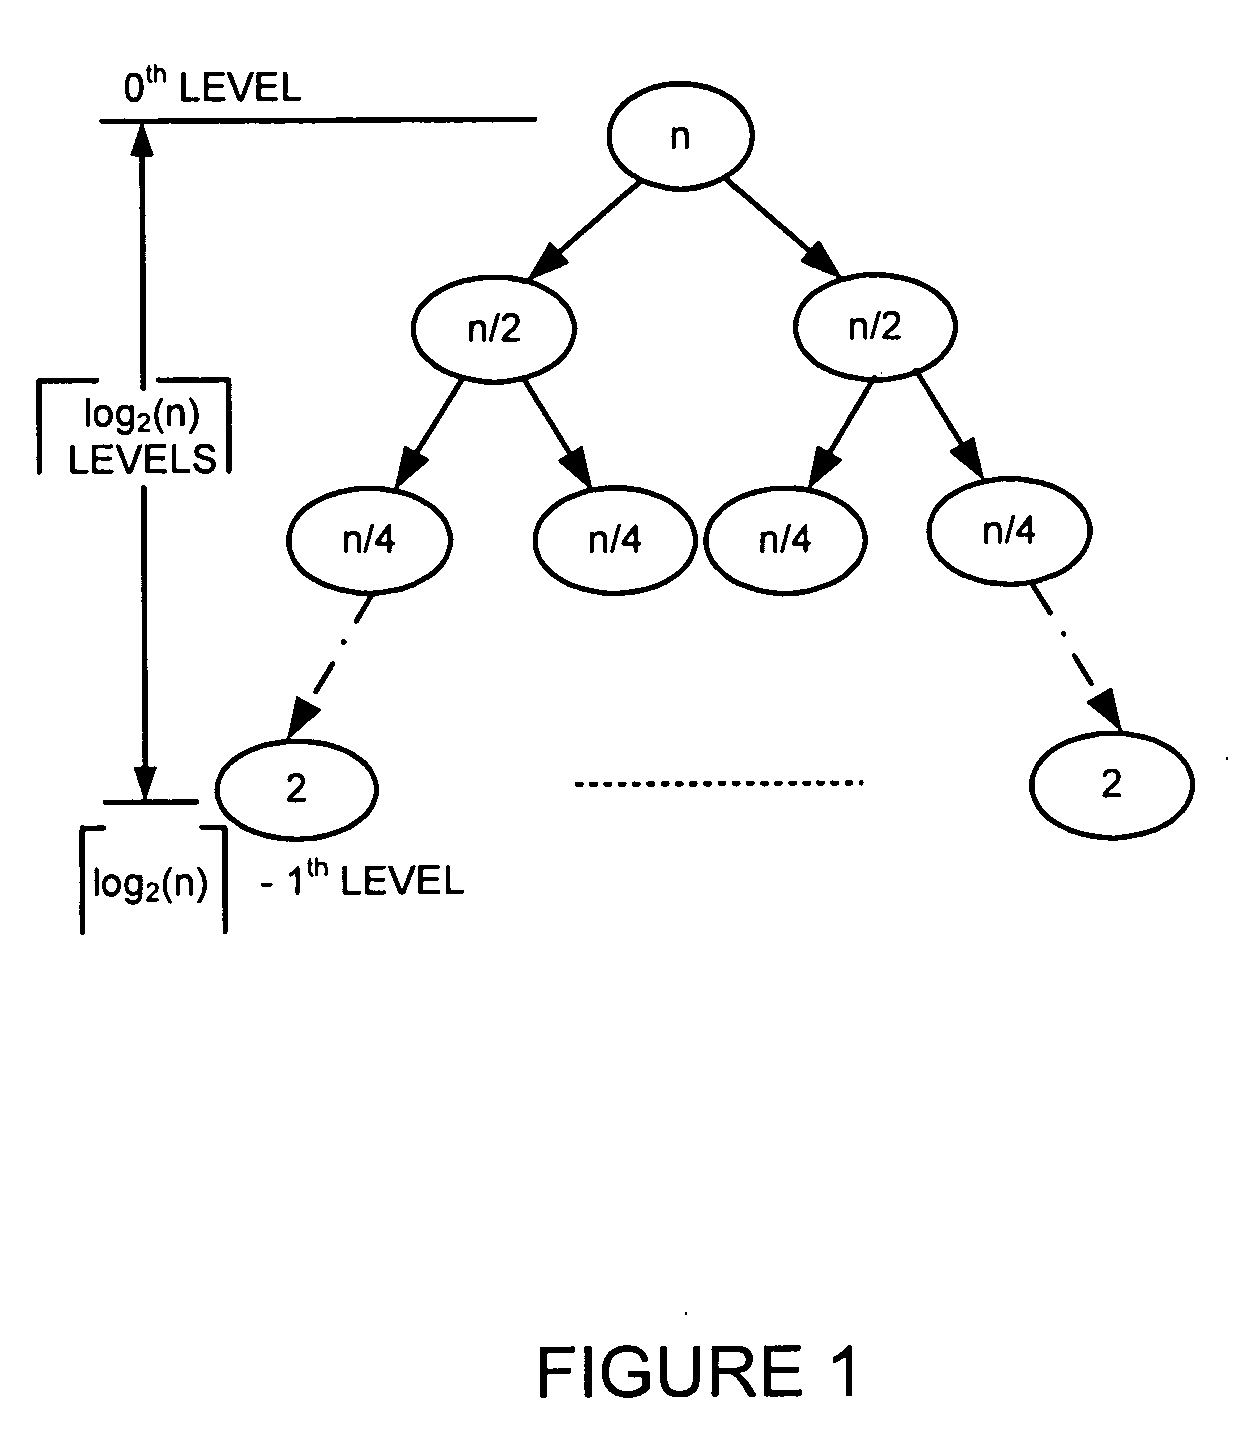 Generating a  boundary hash-based hierarchical data structure associated with a plurality of known arbitrary-length bit strings and using the generated hierarchical data structure for detecting whether an arbitrary-length bit string input matches one of a plurality of known arbitrary-length bit strings